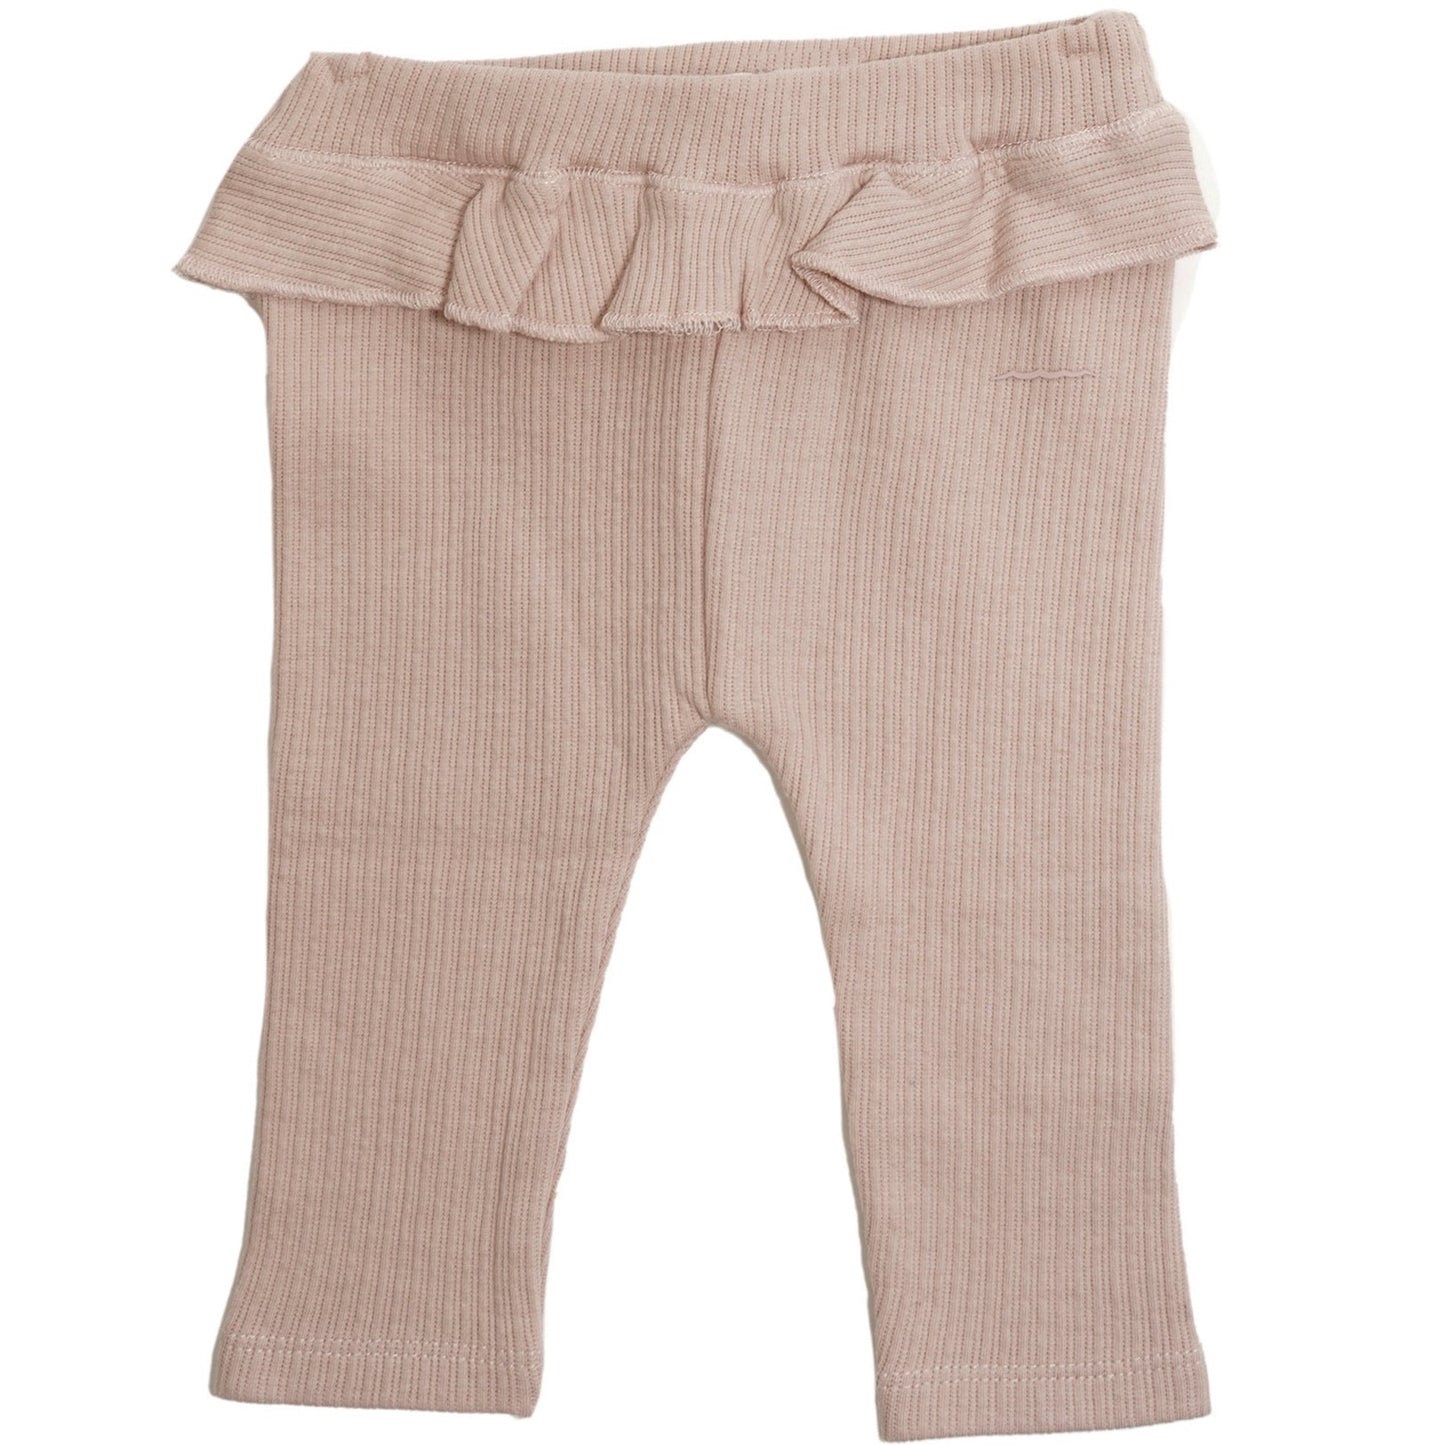 This picture shows a pair of soft pink leggings with a ruffle at the top. made out of 100% gots organic cotton